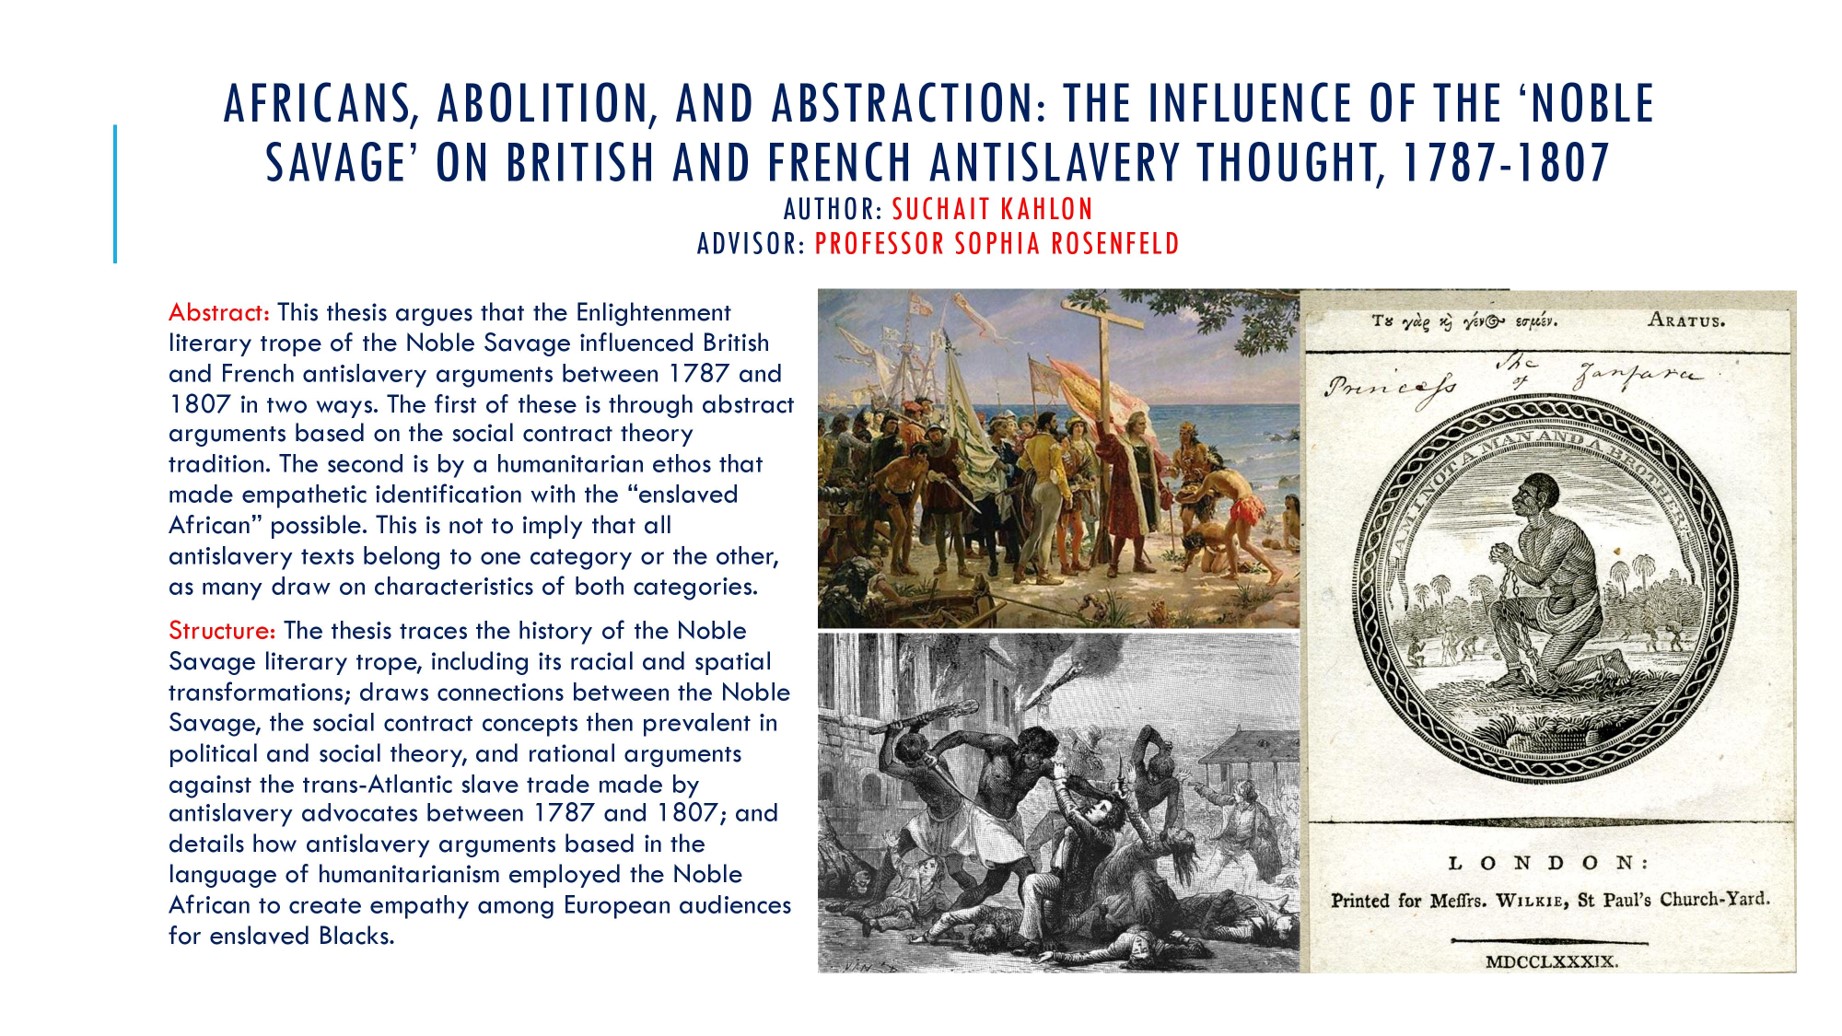 Africans, Abolition, and Abstraction: The Influence of the 'Noble Savage' on British and French Antislavery Thought, 1787-1807